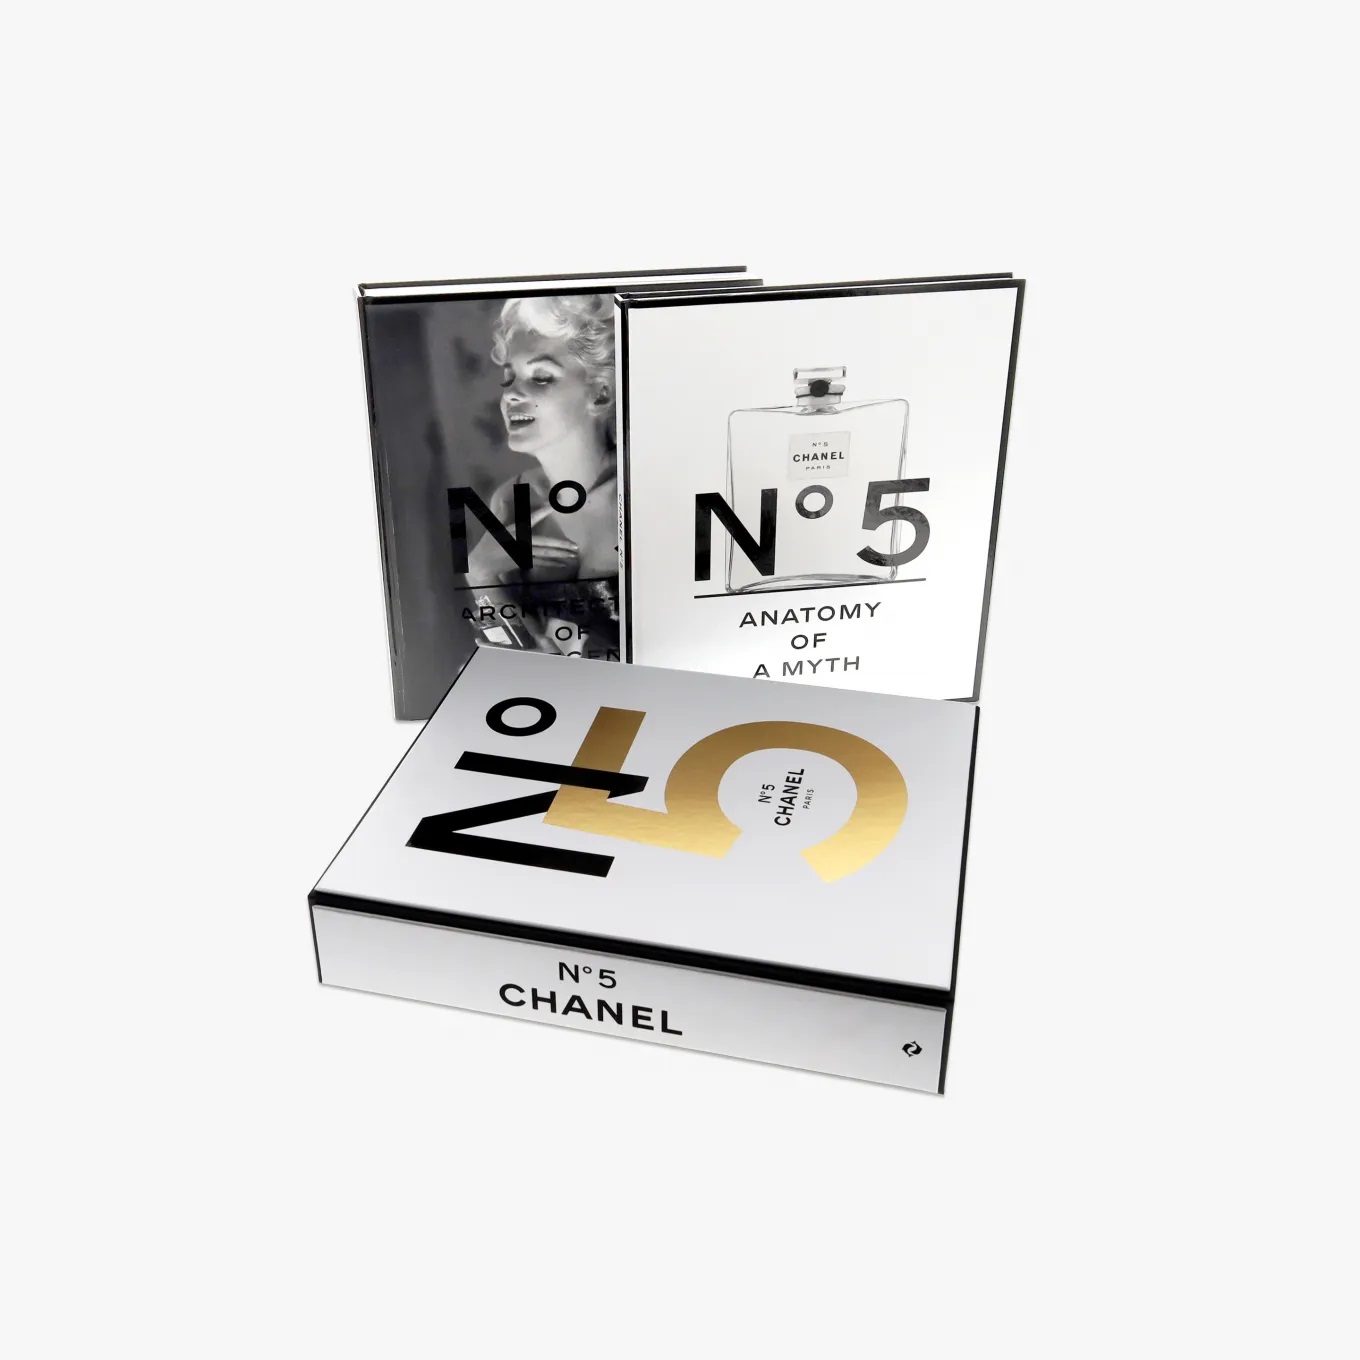 Perfume Literature: A New Book on Chanel N°5, The Essence of a